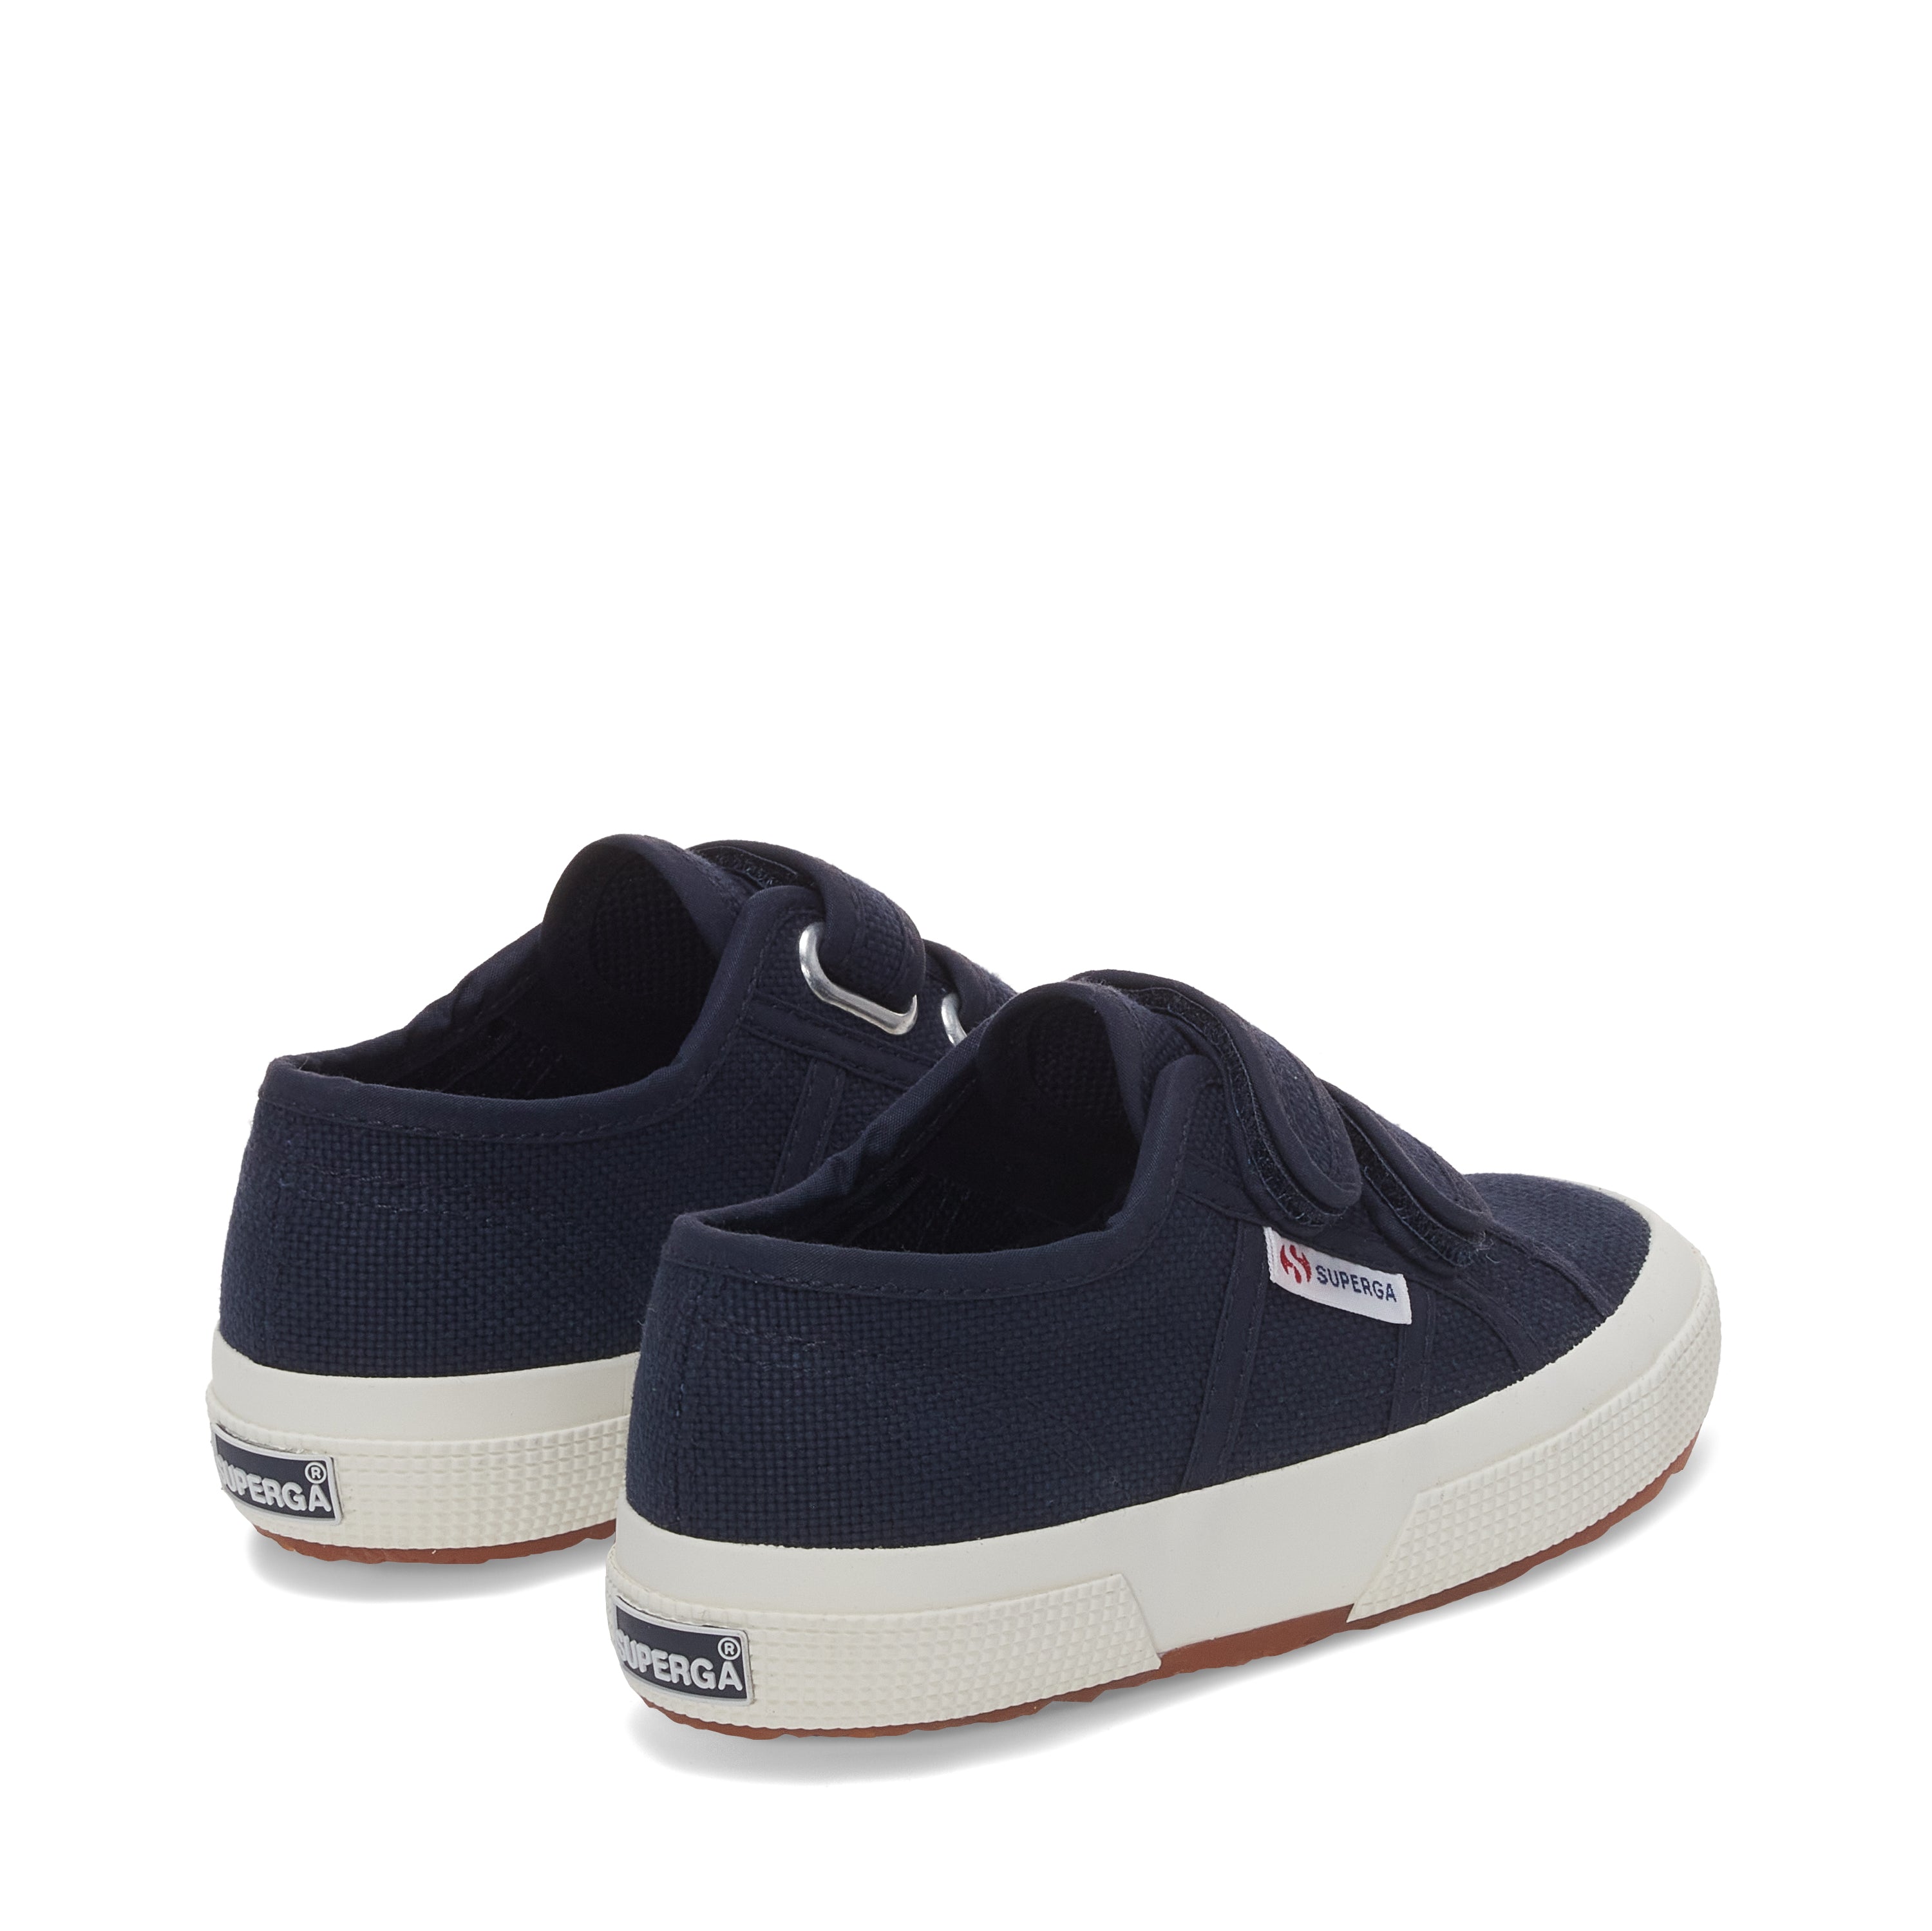 Superga 2750 Kids Cotjstrap Classic Sneakers - Navy Avorio. Back view.